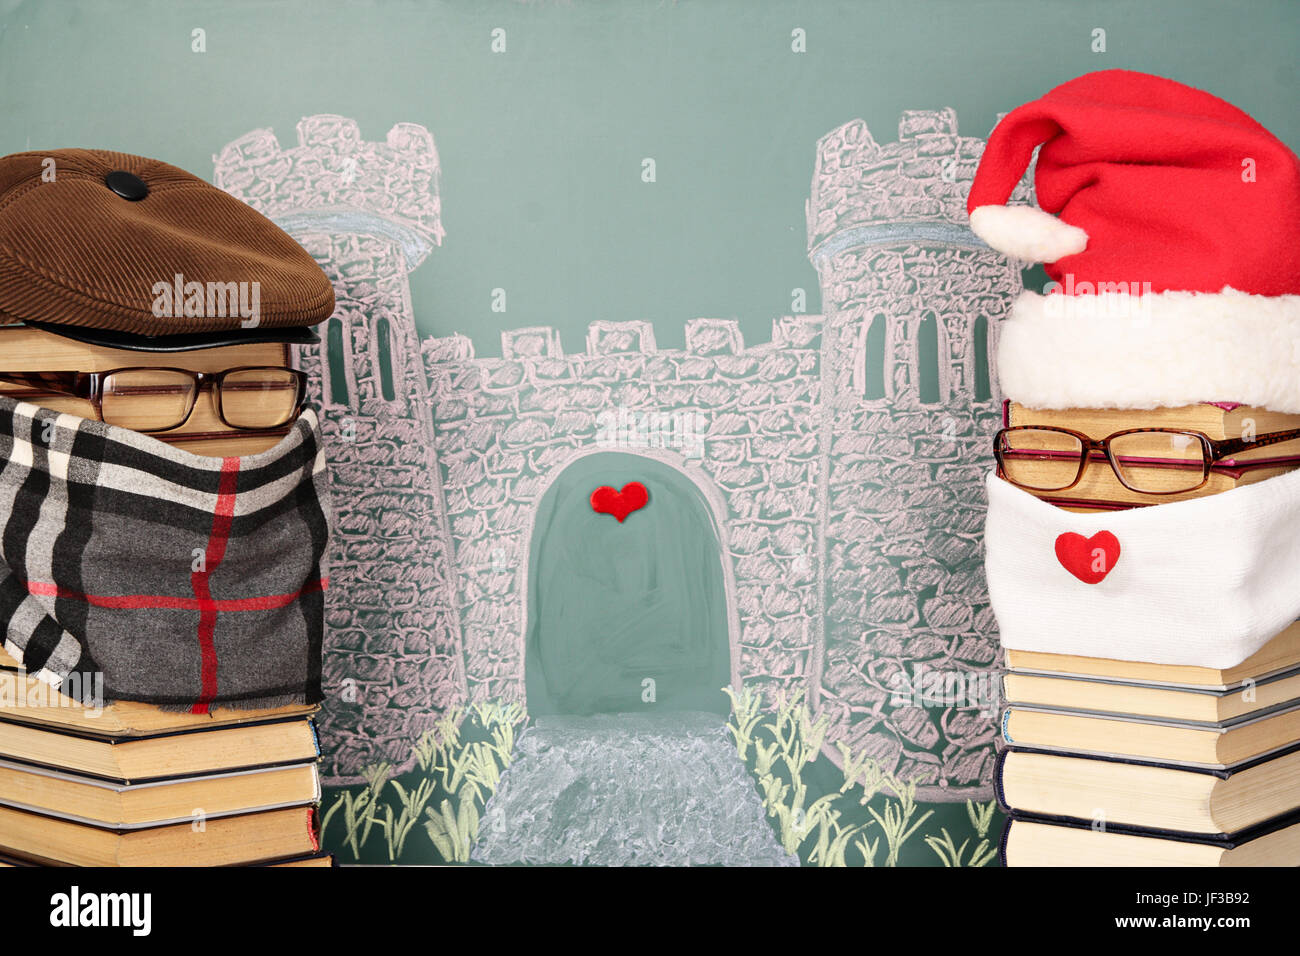 Unusual Santa Claus and author of story from books before blackboard with drawing chalk of castle Stock Photo